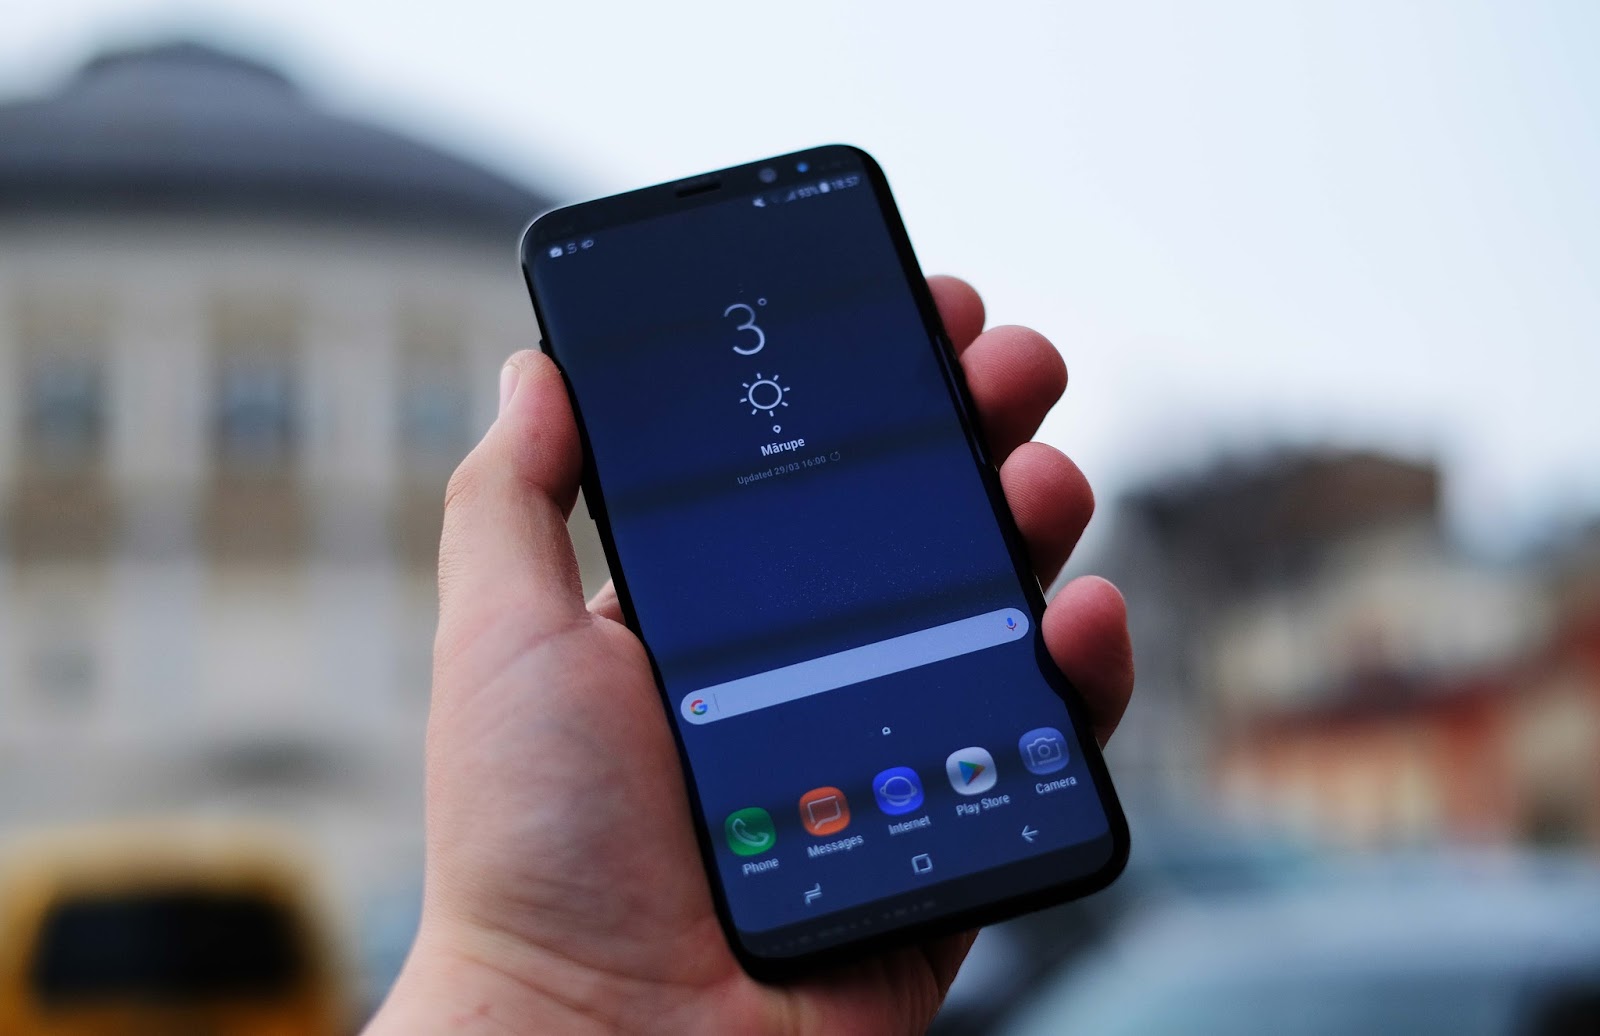 Samsung Galaxy S8 and S8+ has reached 80,000 pre-orders in India